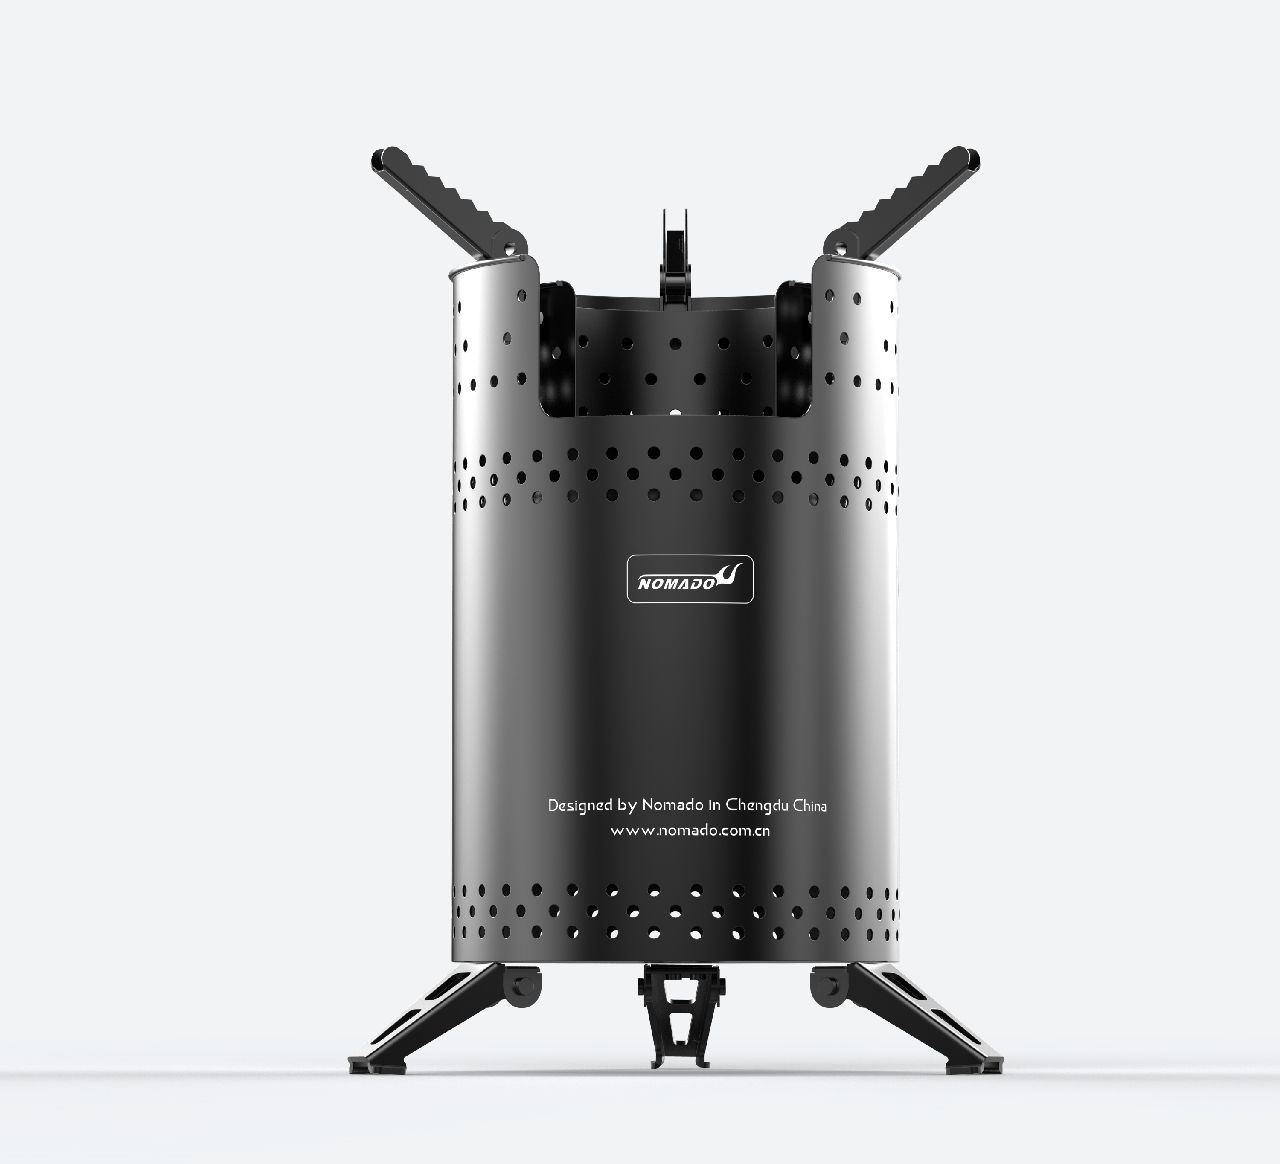 All in One Stainless Firewood Portable Stove